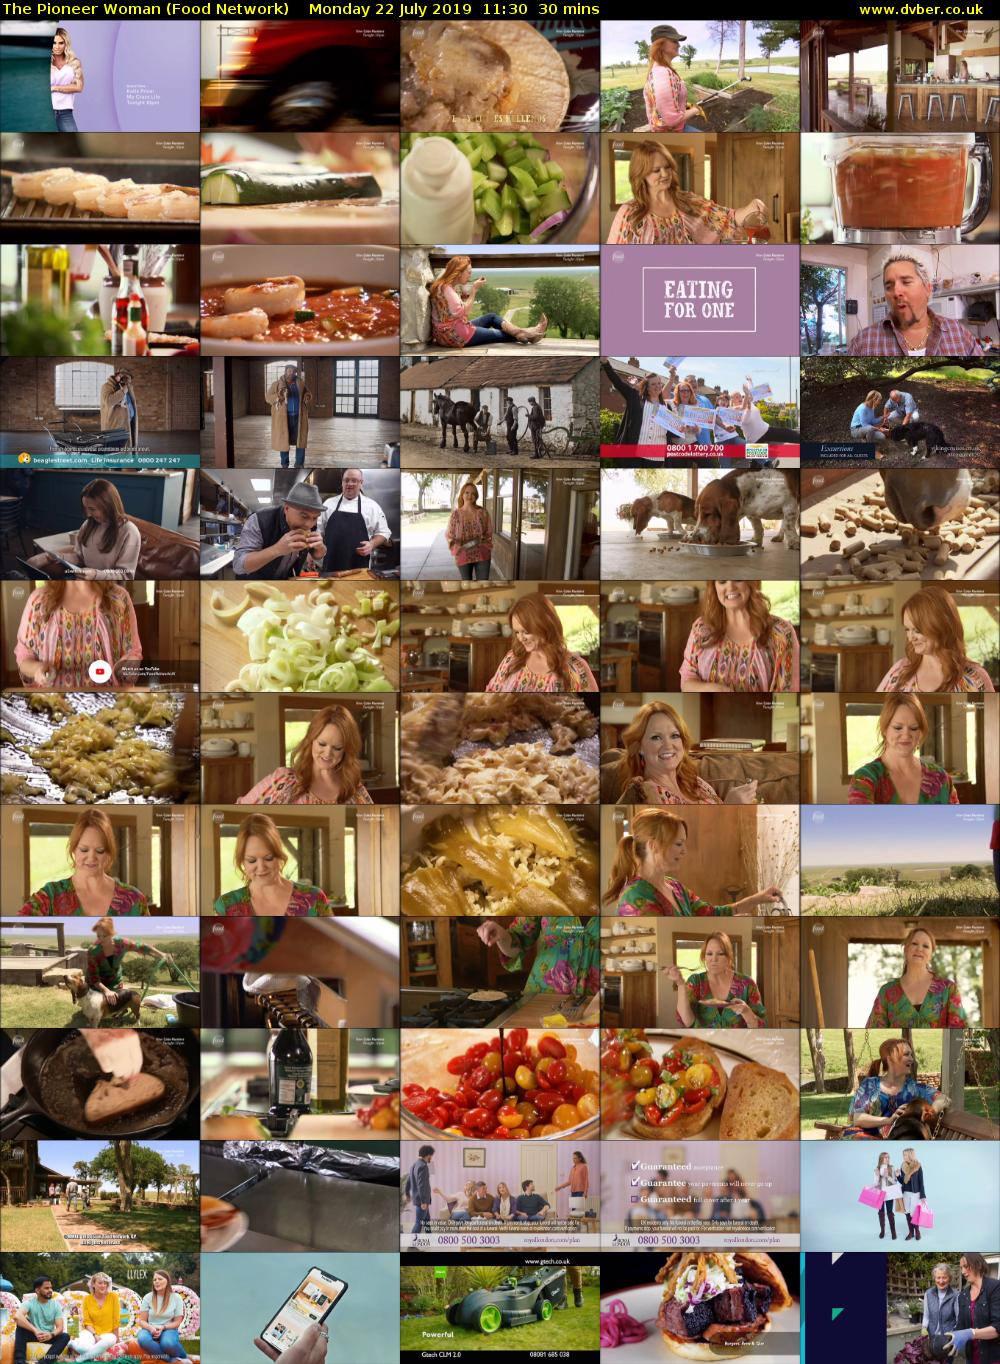 The Pioneer Woman (Food Network) Monday 22 July 2019 11:30 - 12:00